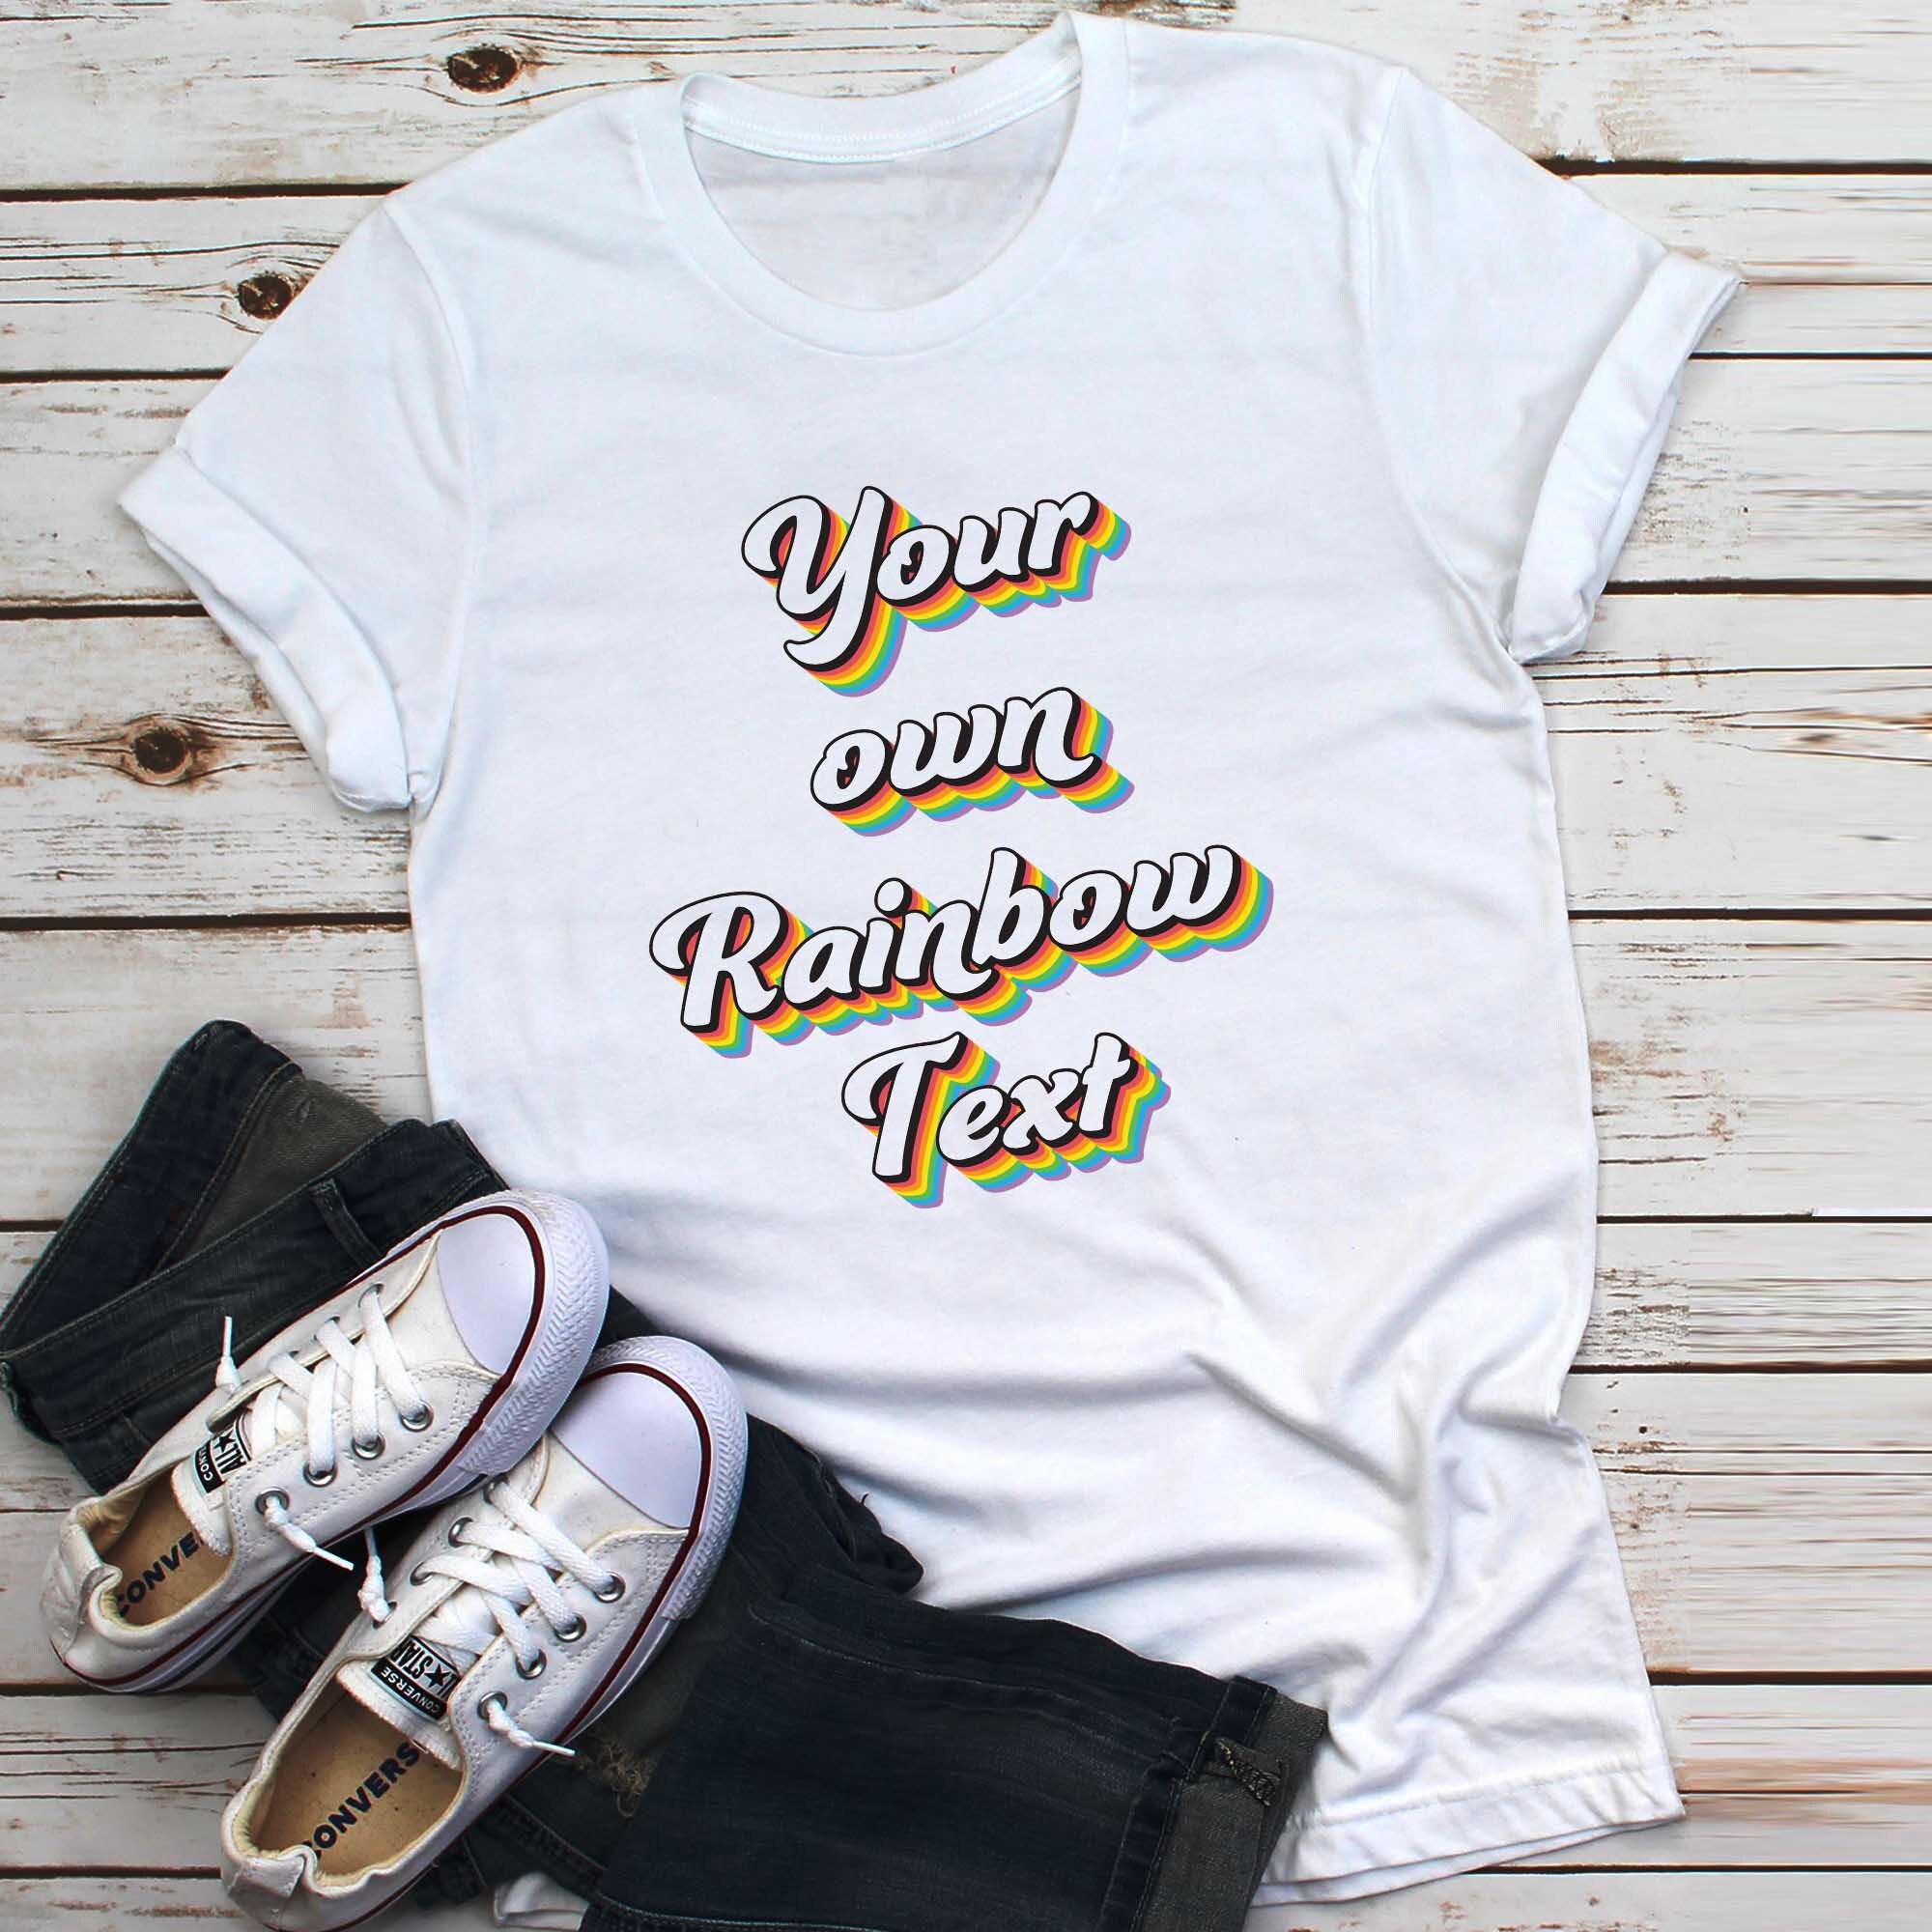 Discover Your Text Here, Rainbow Personalized Shirt, Gay Custom Tee, Design Your LGBTQ Tee, Lesbian Birthday Gift, Gay Pride, Gay Couple Matching Tee